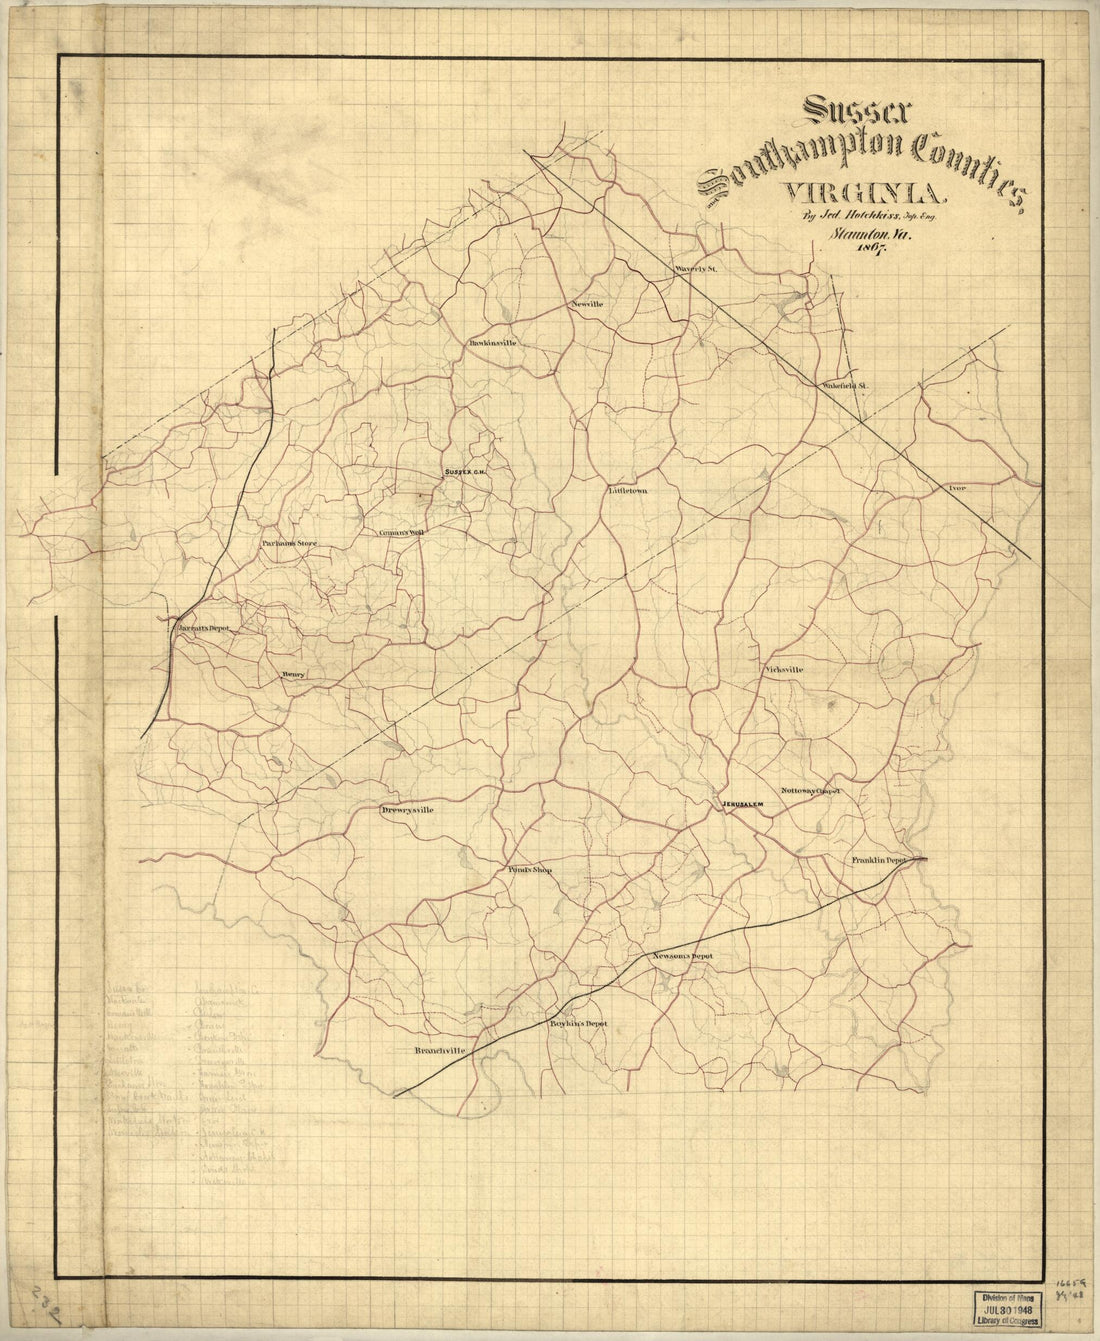 This old map of Sussex, Southampton Counties, Virginia from 1867 was created by Jedediah Hotchkiss in 1867